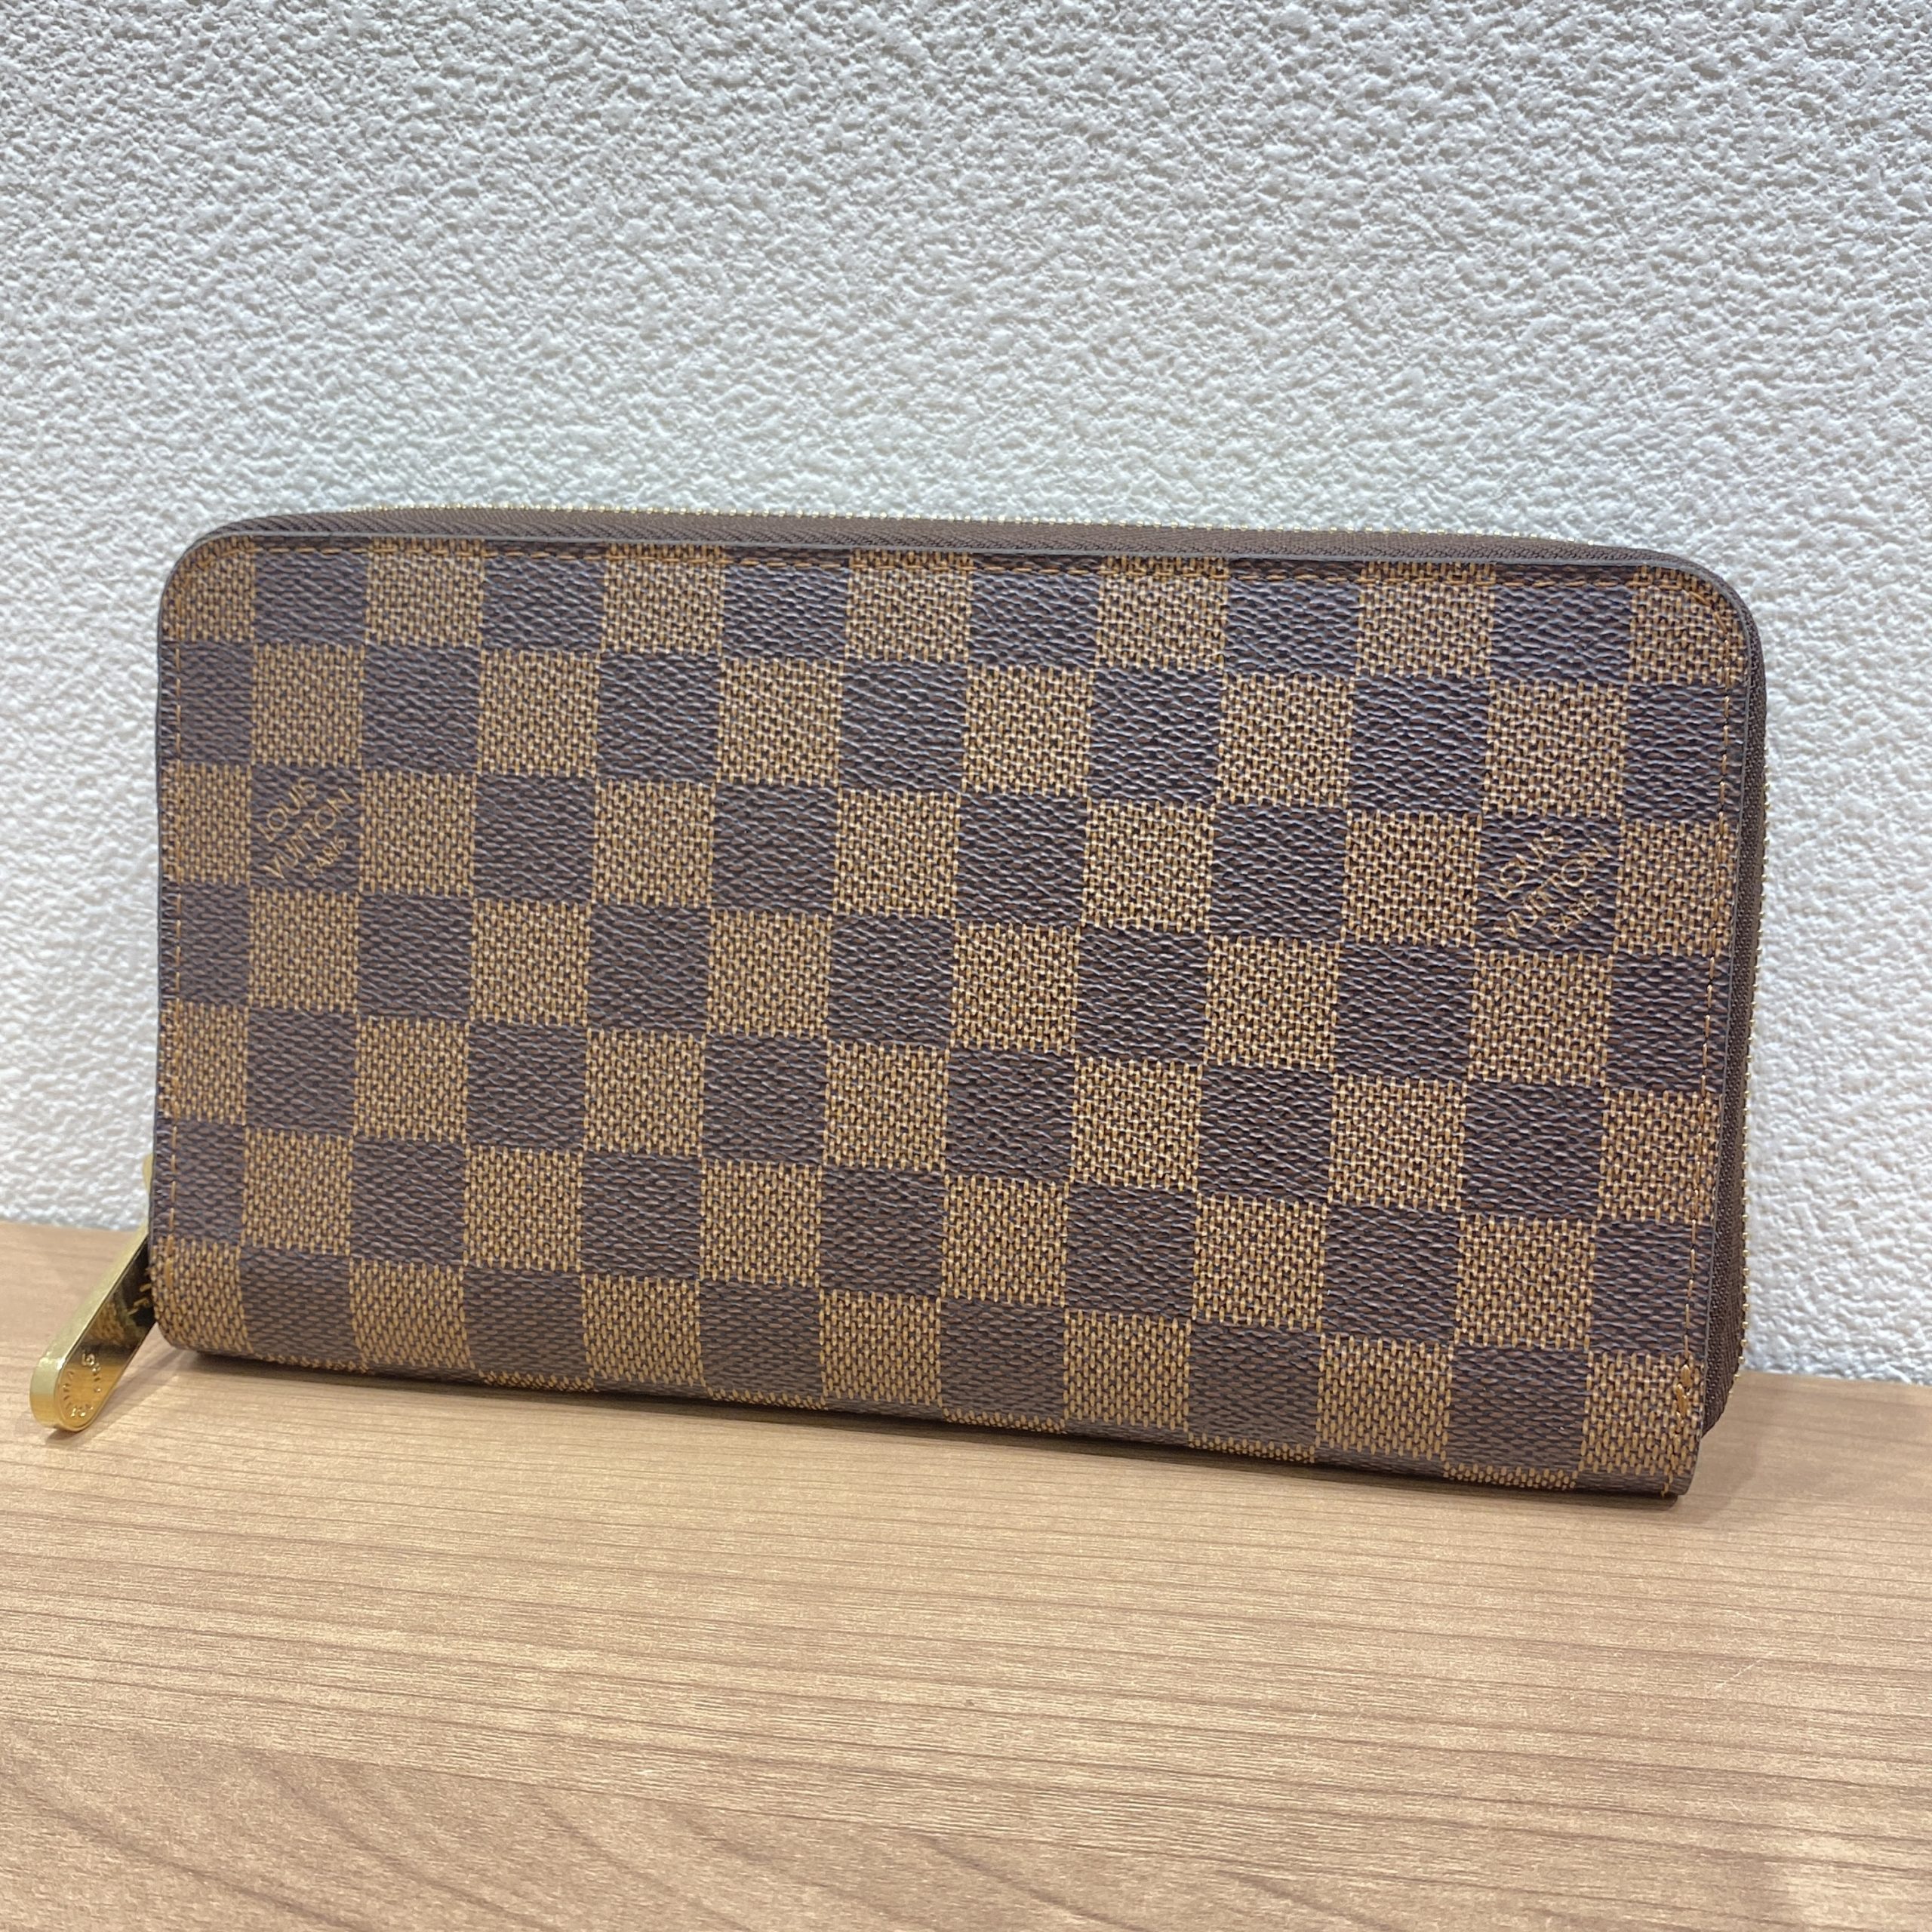 【LOUIS VUITTON/ルイヴィトン】ダミエ ジッピーオーガナイザー N60003